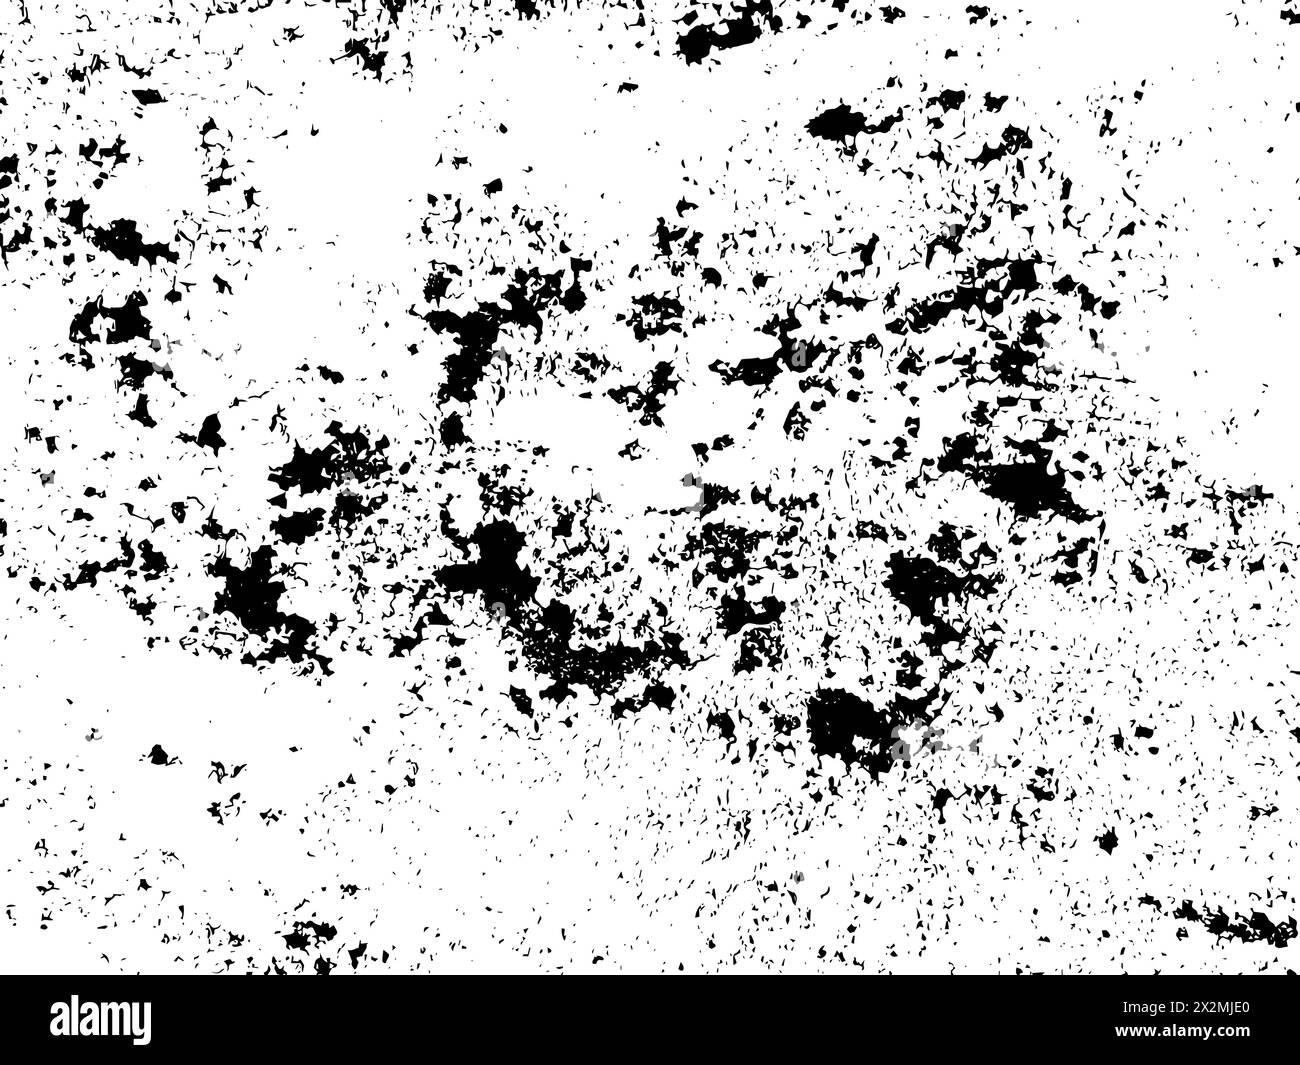 Grunge grainy dirty texture. Abstract urban distress overlay background. Vector illustration Stock Vector